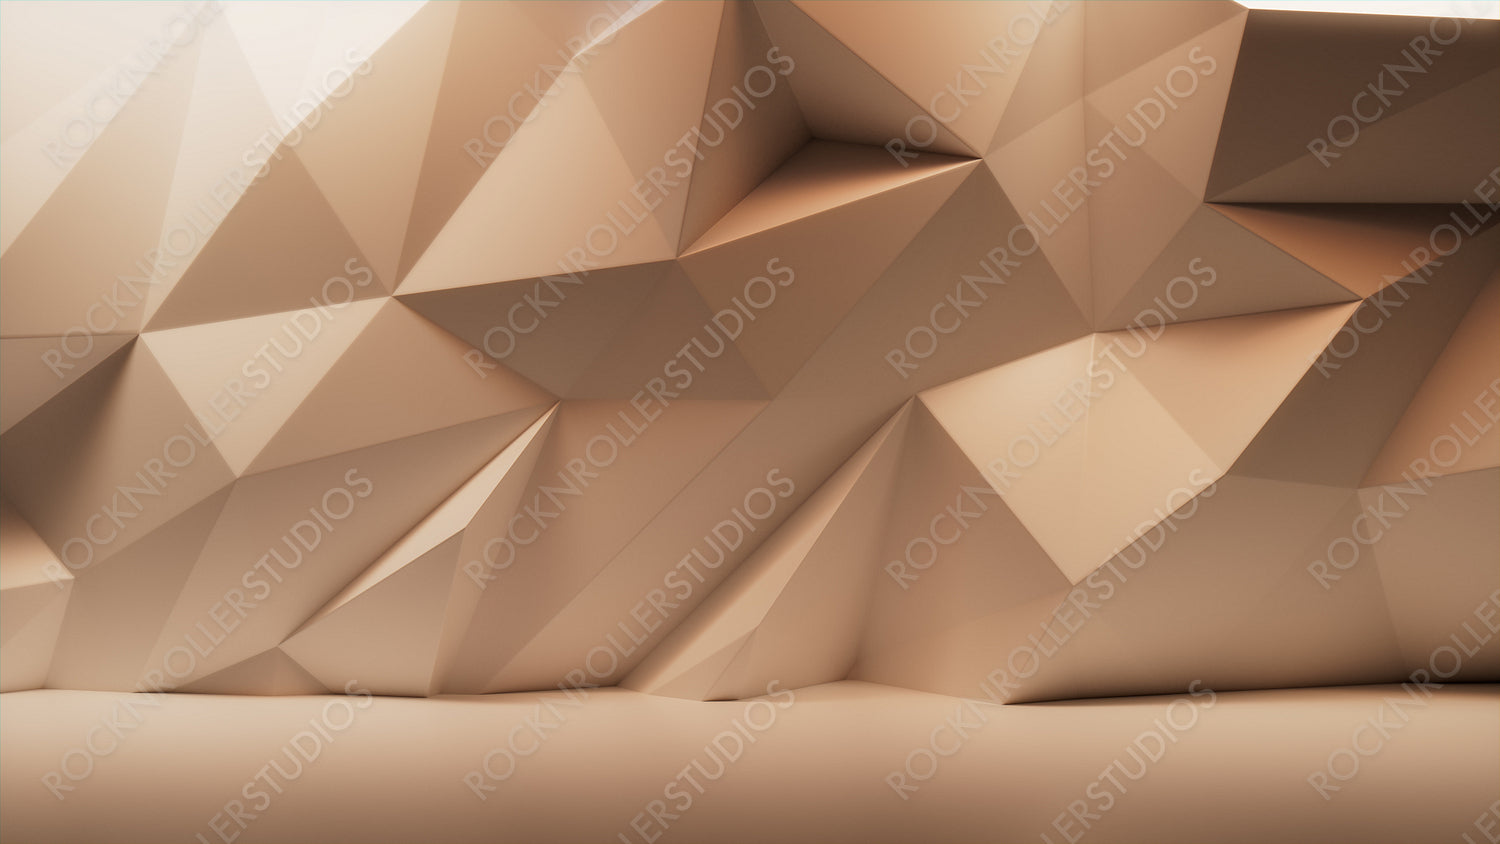 Futuristic Product Stage with Sand 3D Wall. Premium Architectural Wallpaper.